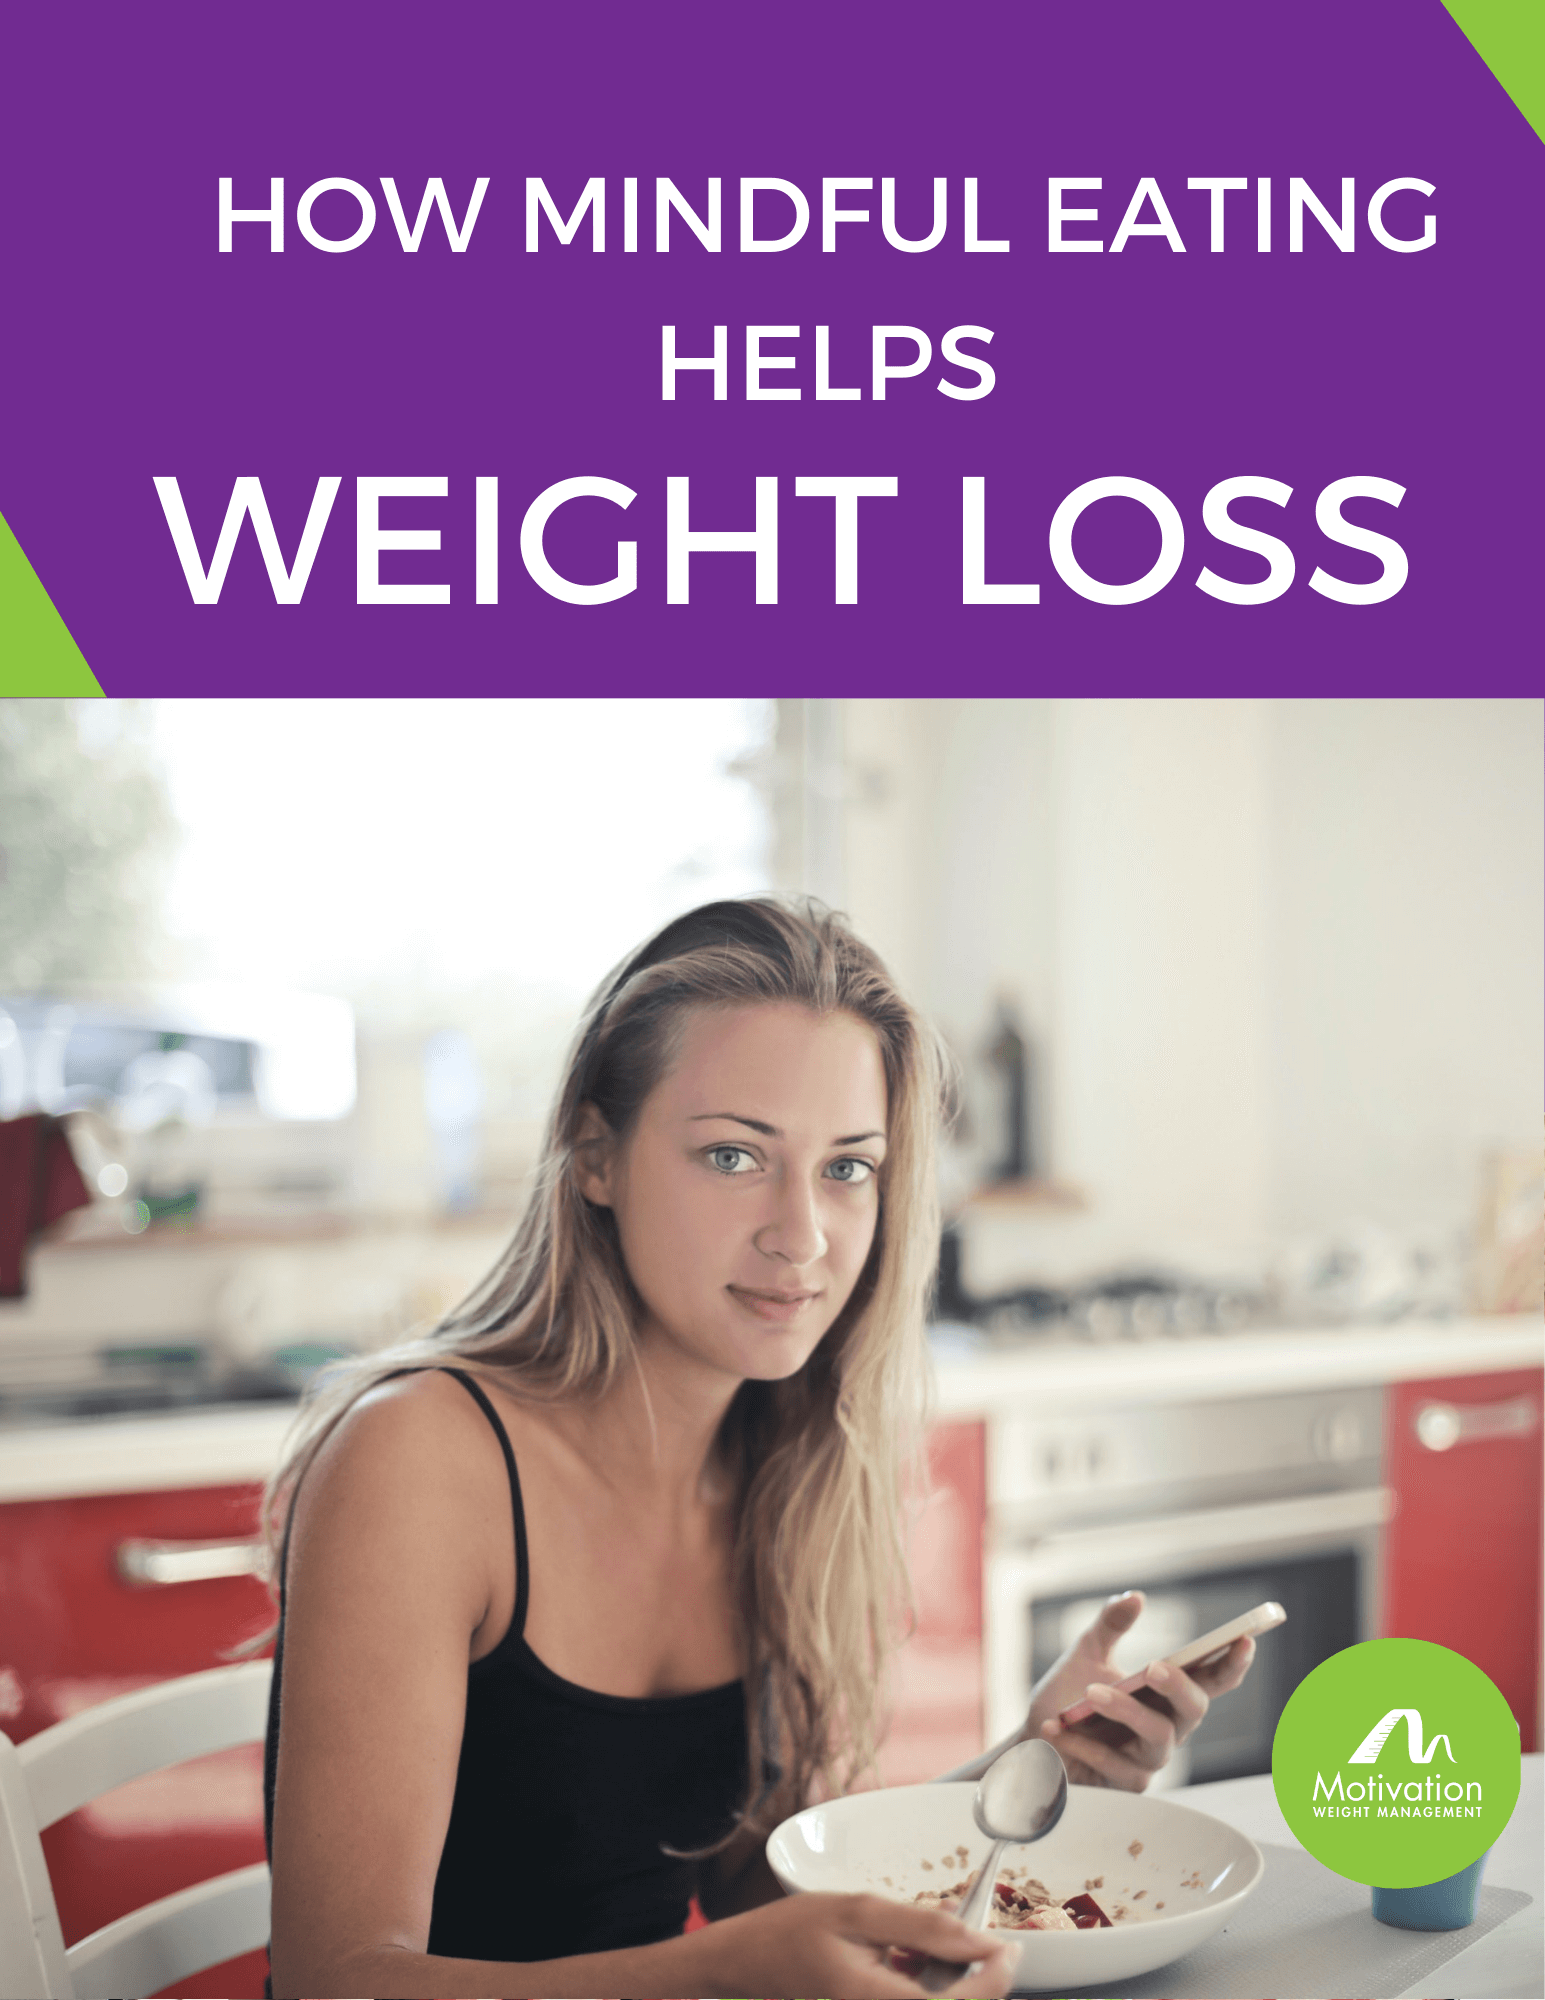 How Mindful Eating Helps Weight Loss